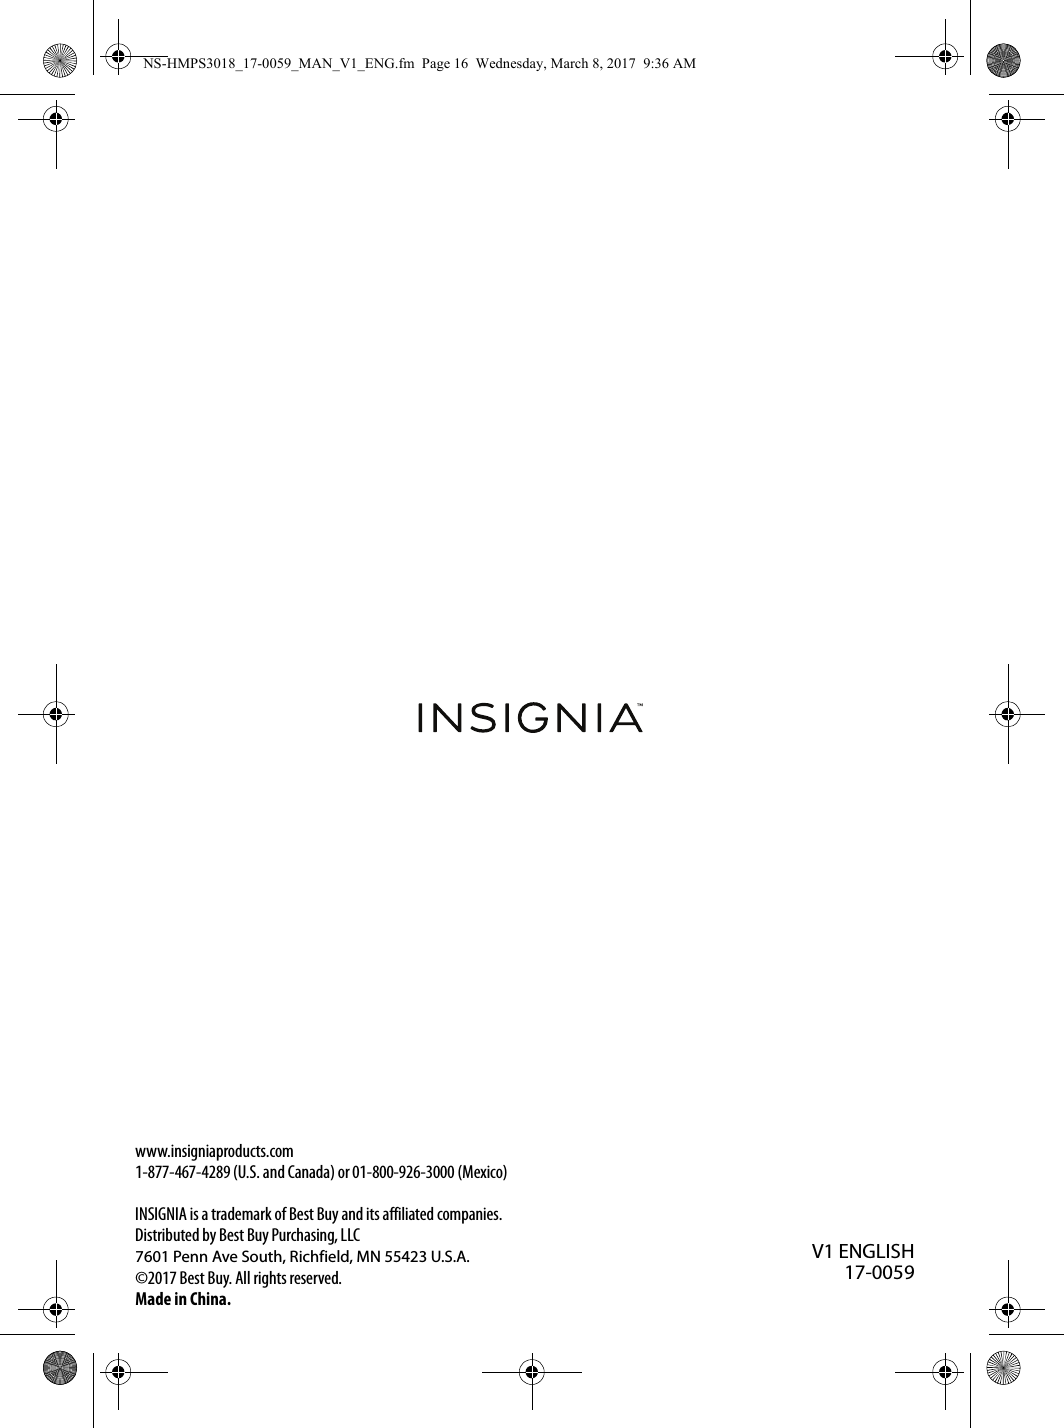 www.insigniaproducts.com1-877-467-4289 (U.S. and Canada) or 01-800-926-3000 (Mexico)INSIGNIA is a trademark of Best Buy and its affiliated companies.Distributed by Best Buy Purchasing, LLC7601 Penn Ave South, Richfield, MN 55423 U.S.A.©2017 Best Buy. All rights reserved.Made in China.V1 ENGLISH17-0059NS-HMPS3018_17-0059_MAN_V1_ENG.fm  Page 16  Wednesday, March 8, 2017  9:36 AM